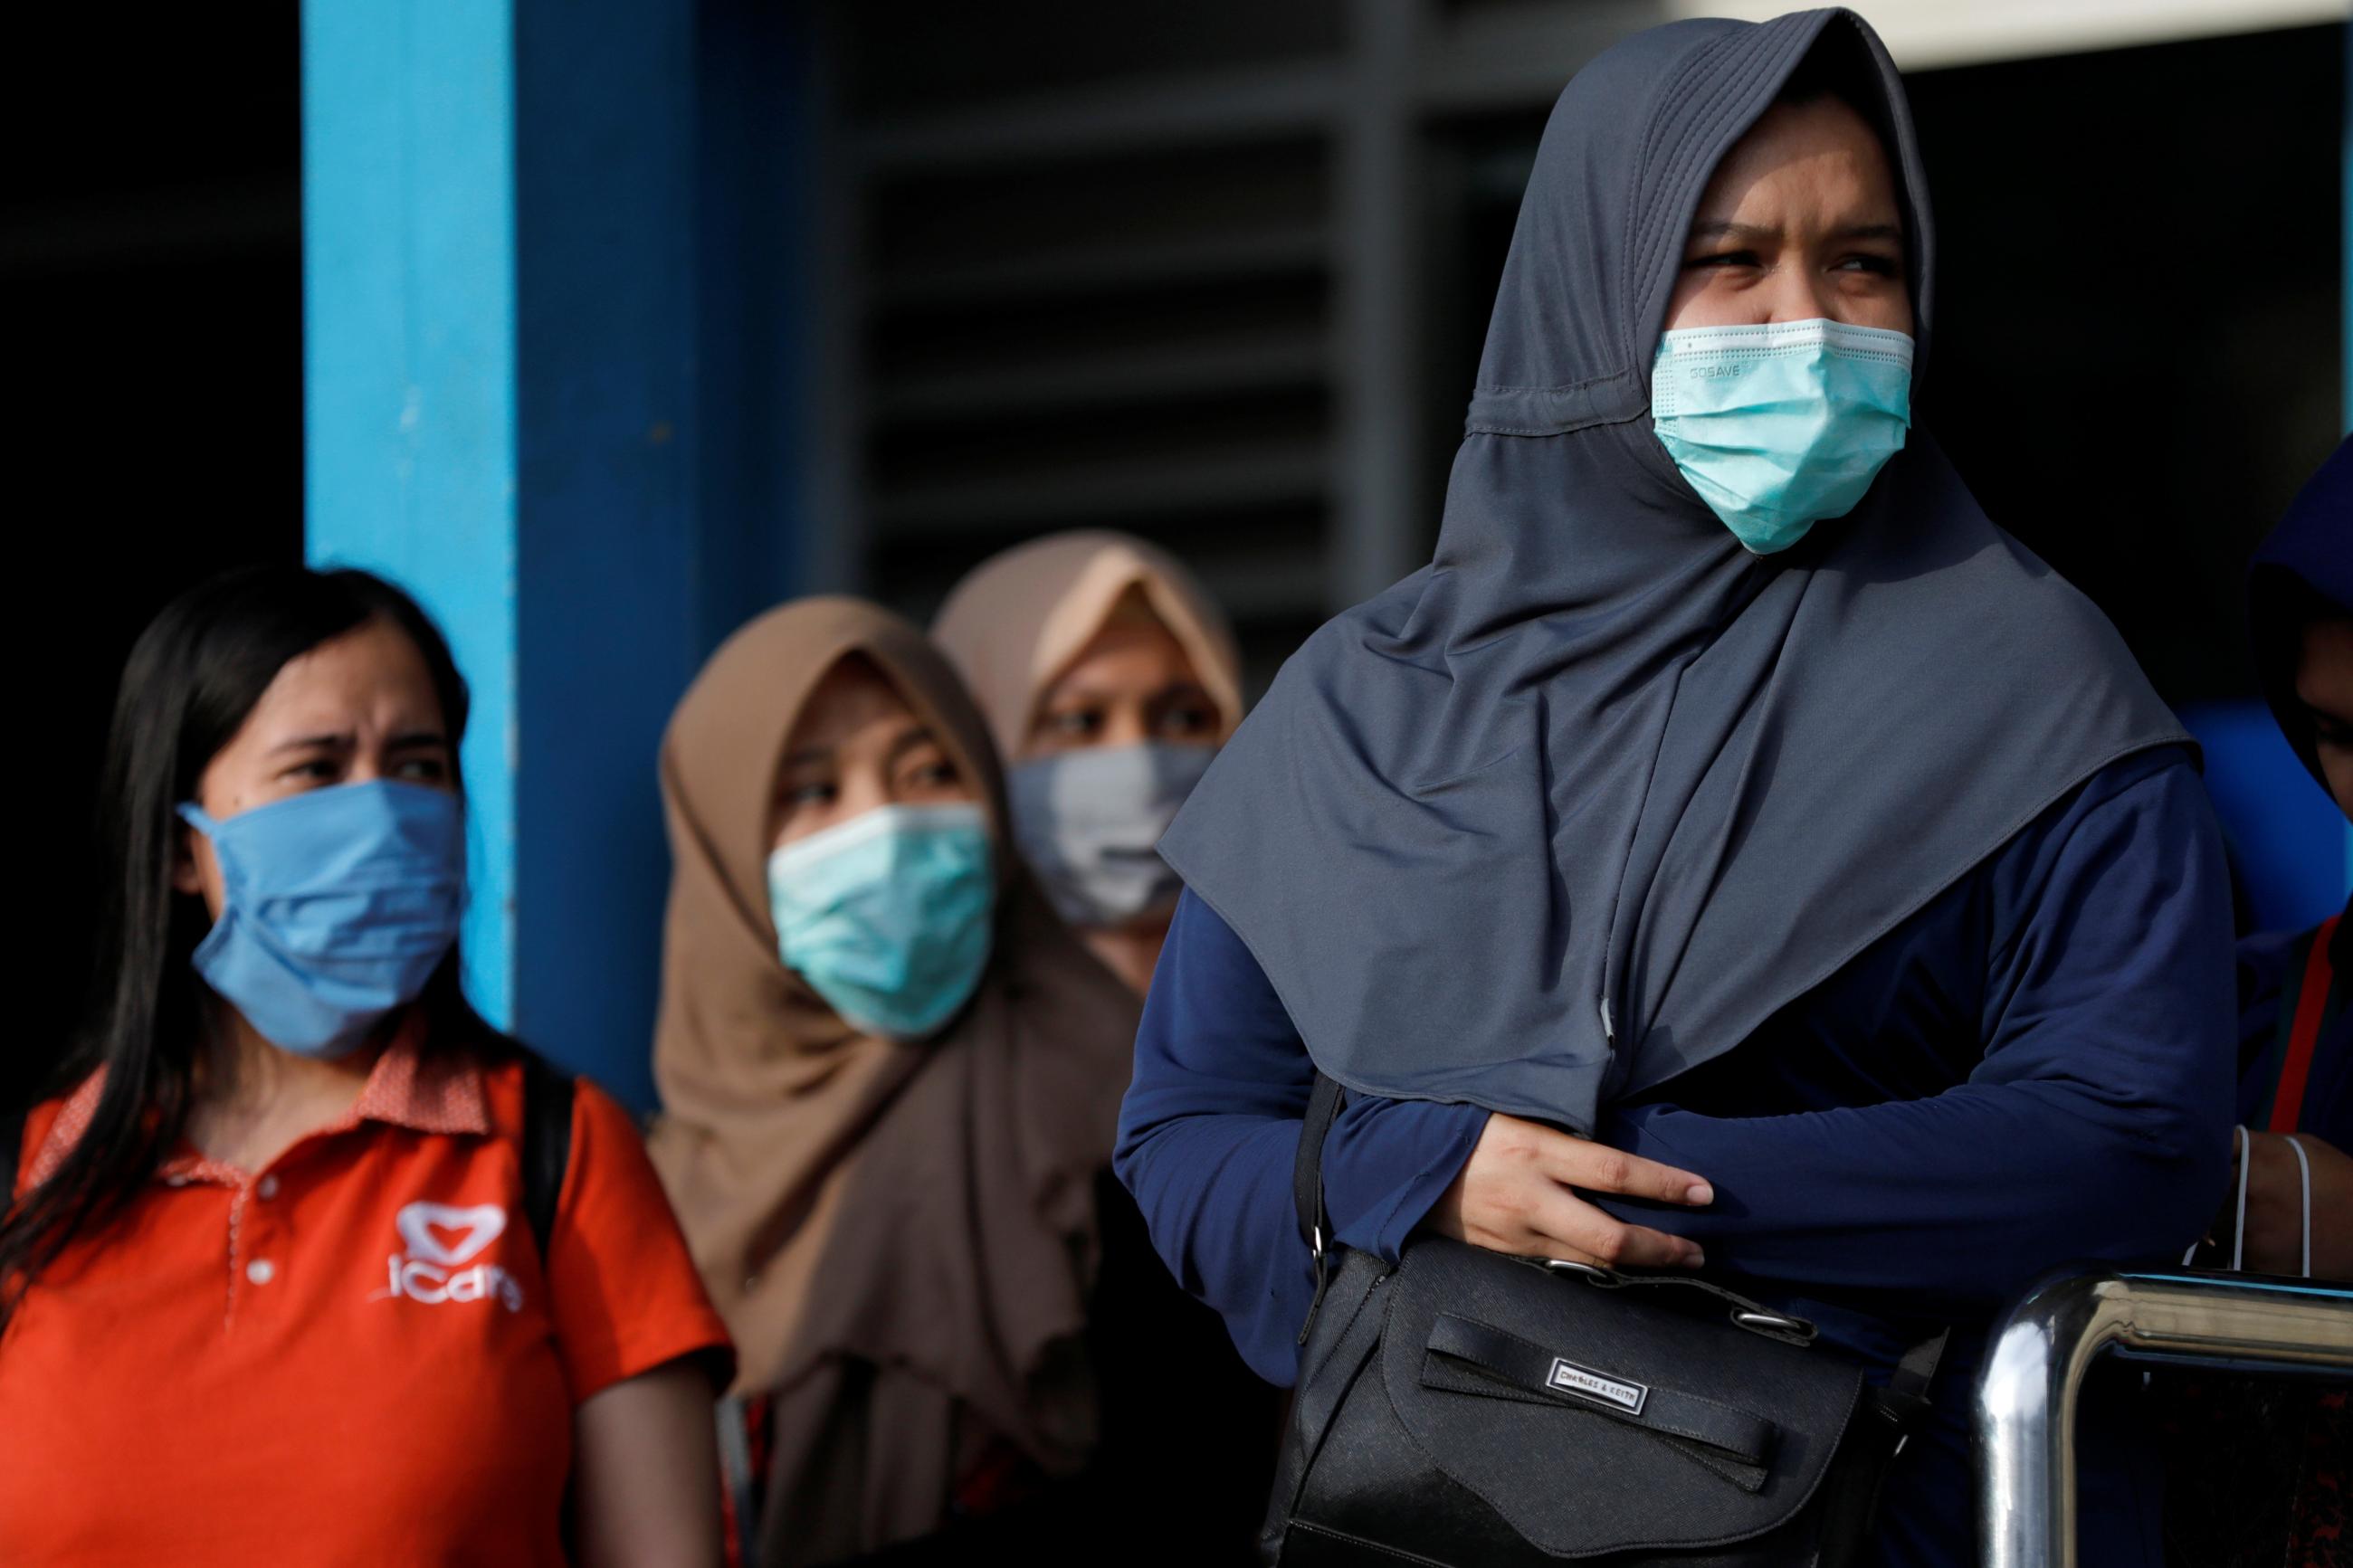 Women wearing face masks stand as they queue for public bus amid the spread of coronavirus disease in Jakarta, Indonesia March 18, 2020.